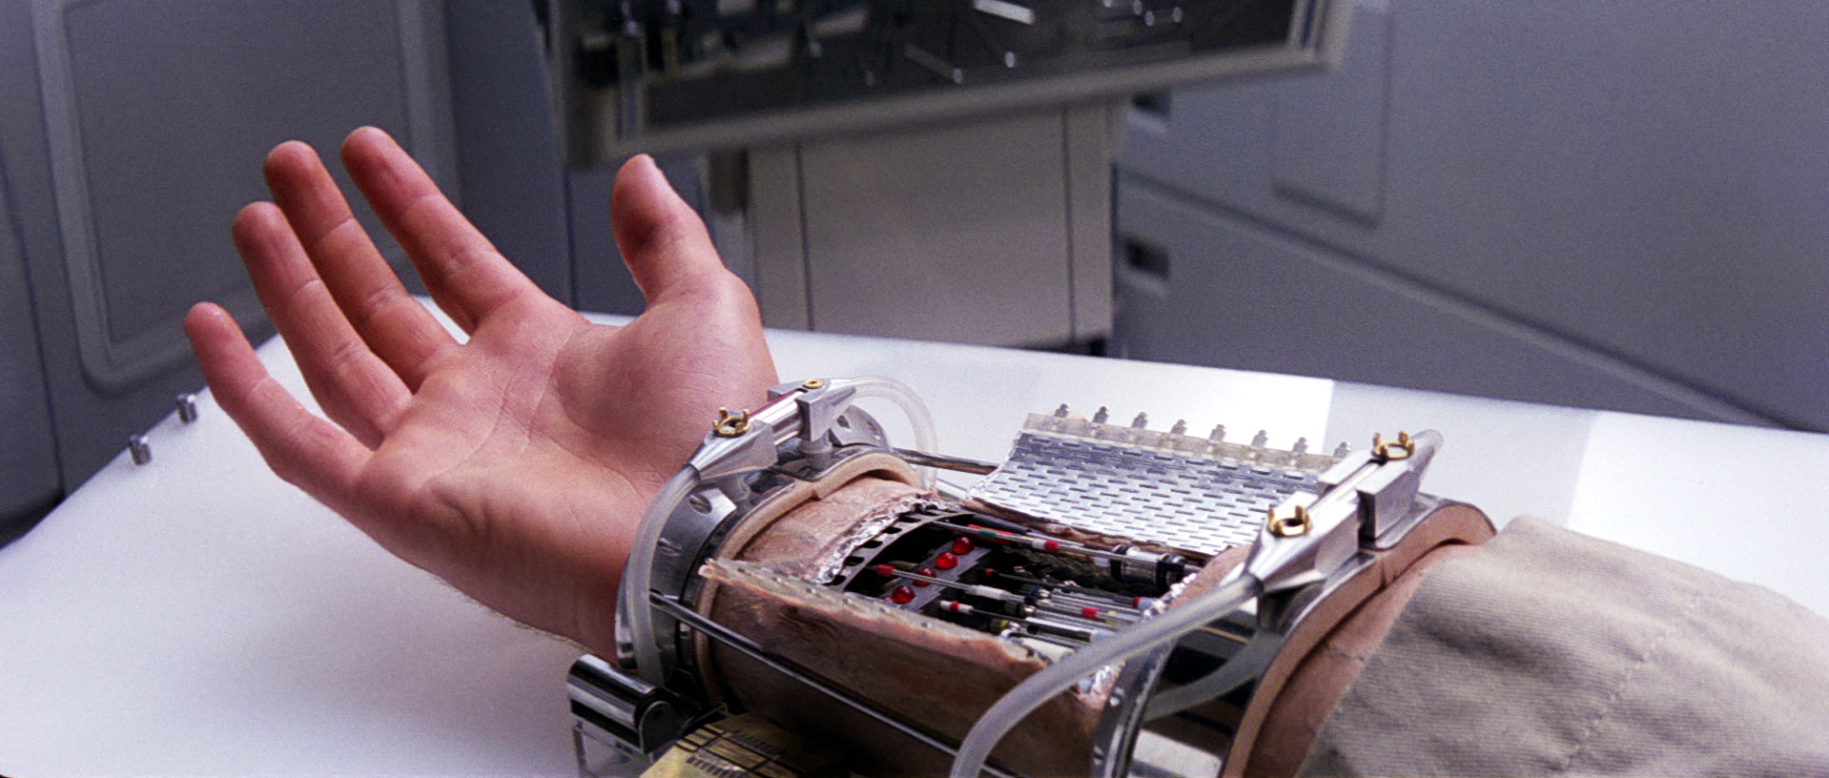 When Luke Skywalker lost his hand in the film "The Empire Strikes Back" (1980), it was replaced with an advanced prosthetic hand with touch-sensitive skin. 